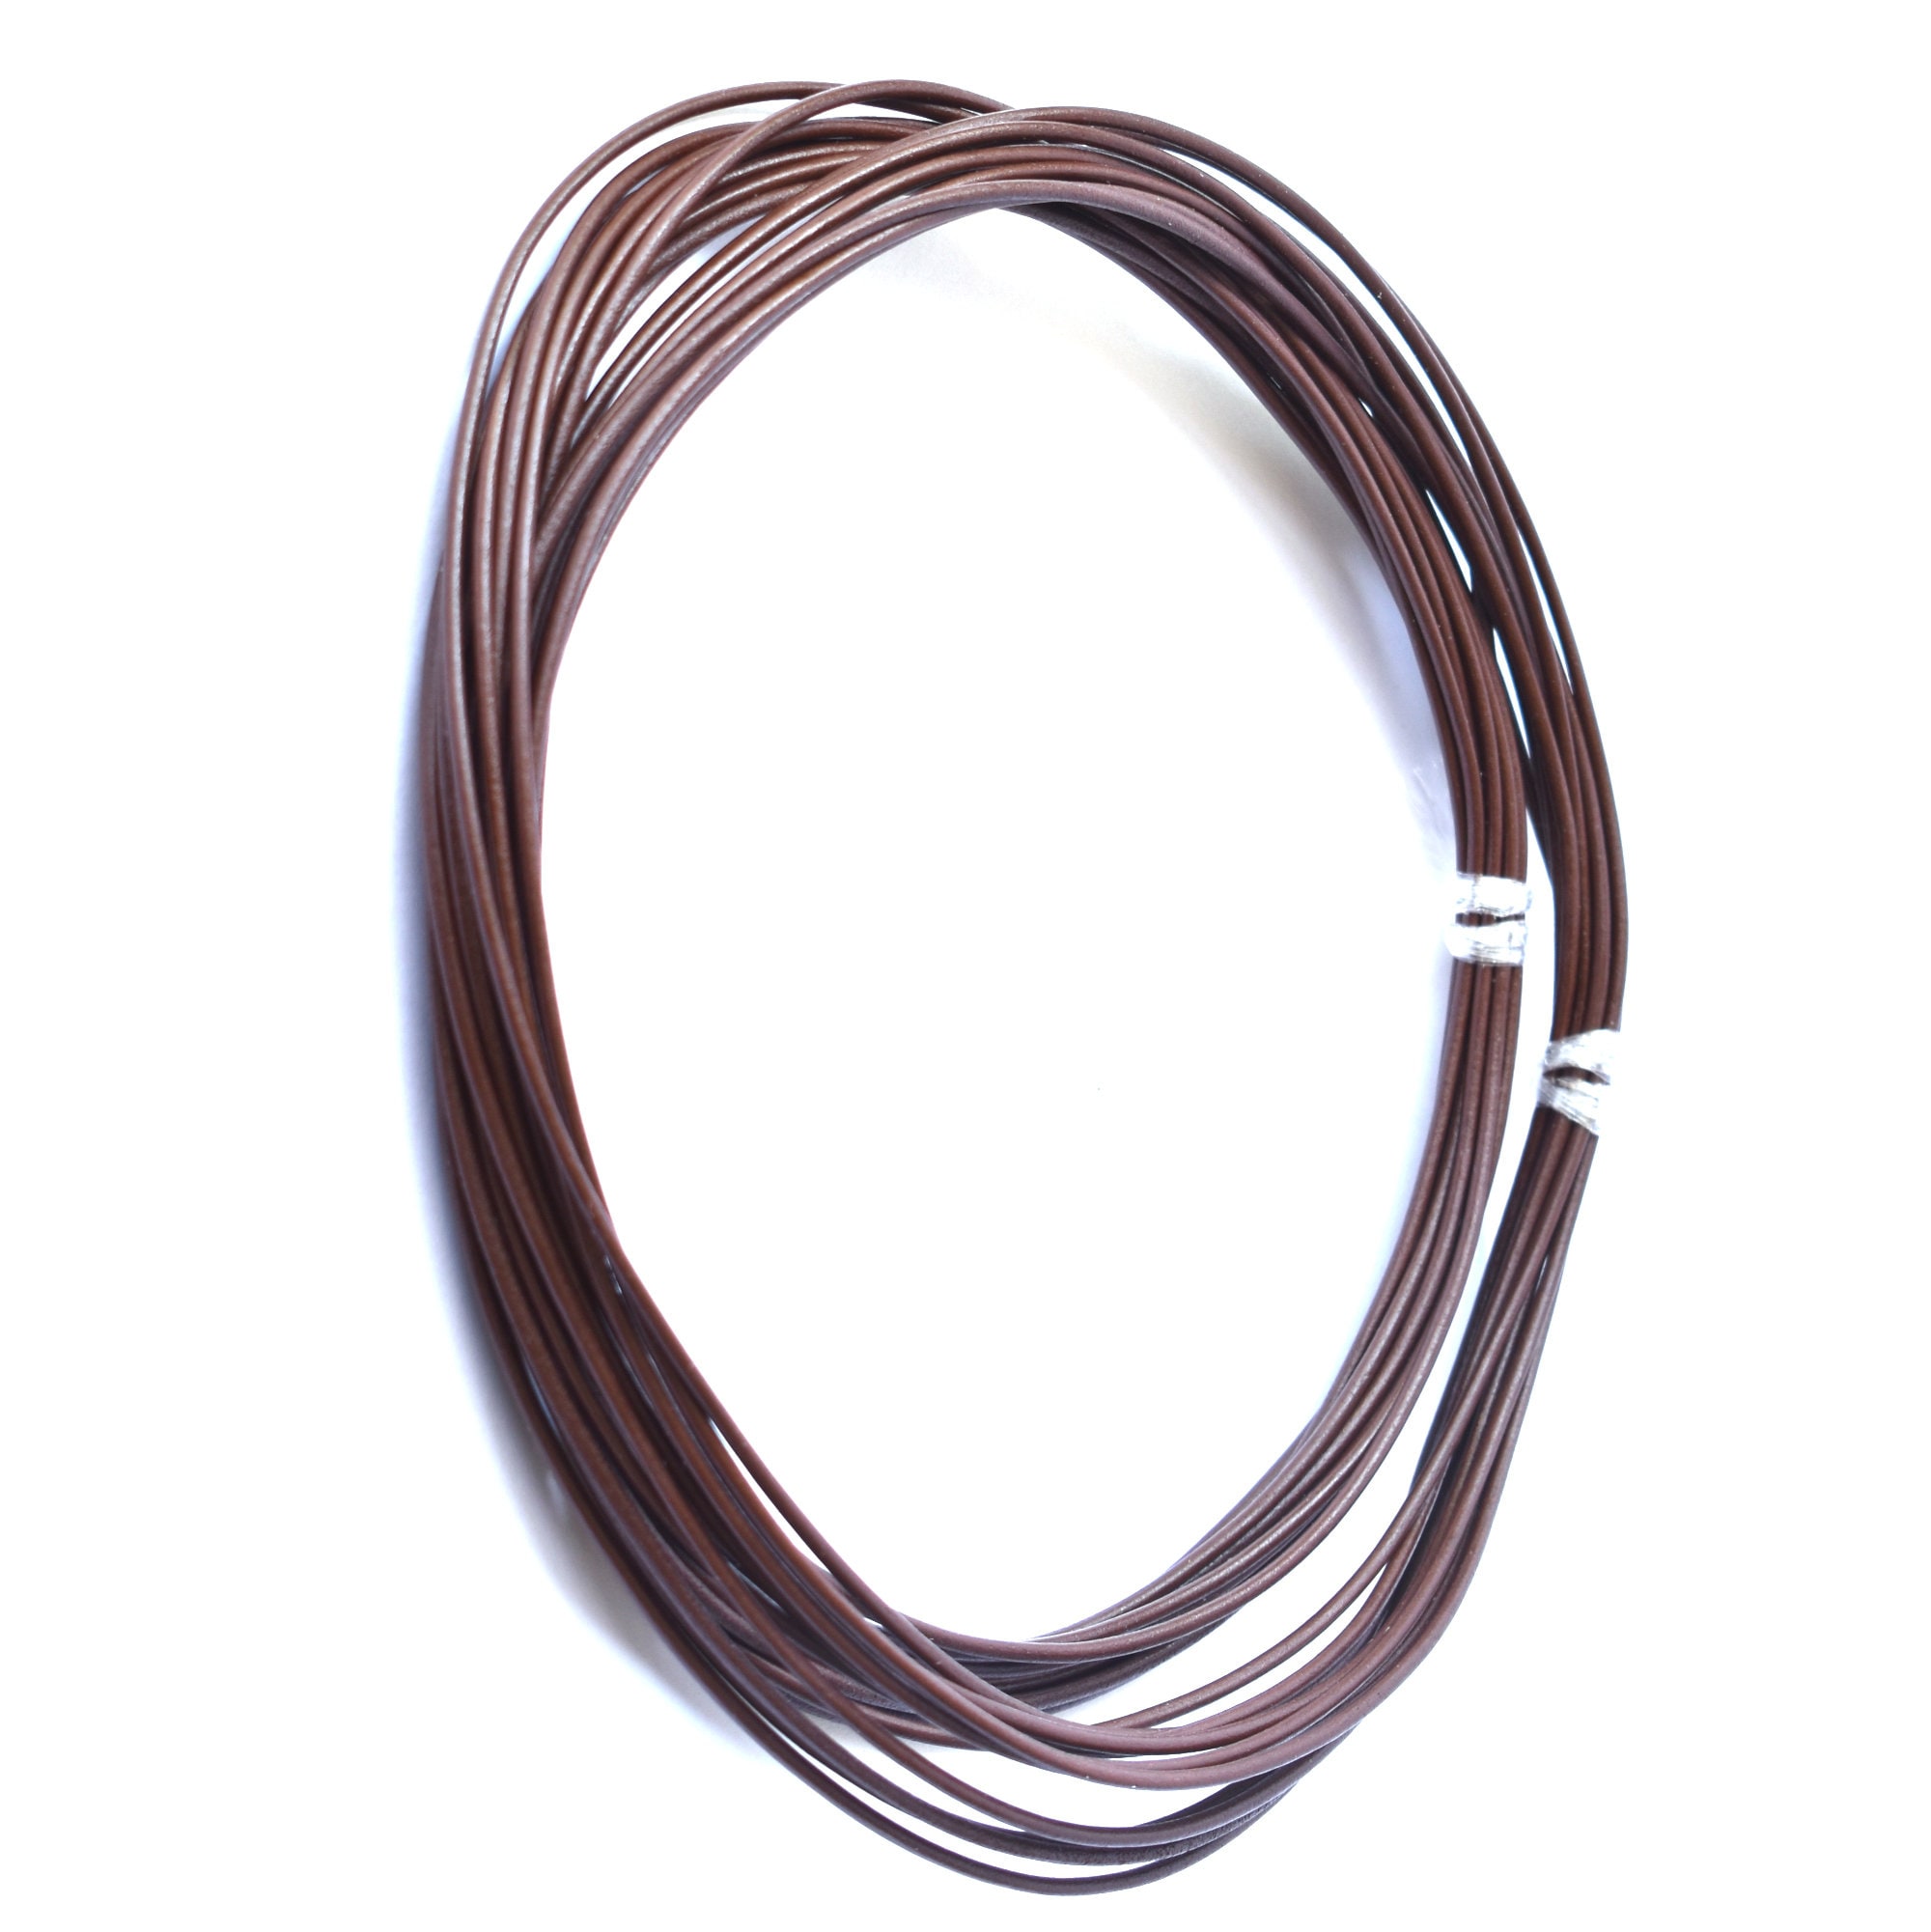 Rustic Soft Flexible Premium Round Leather Cord With Antique Finish for Necklace  Bracelet Jewelry Making 